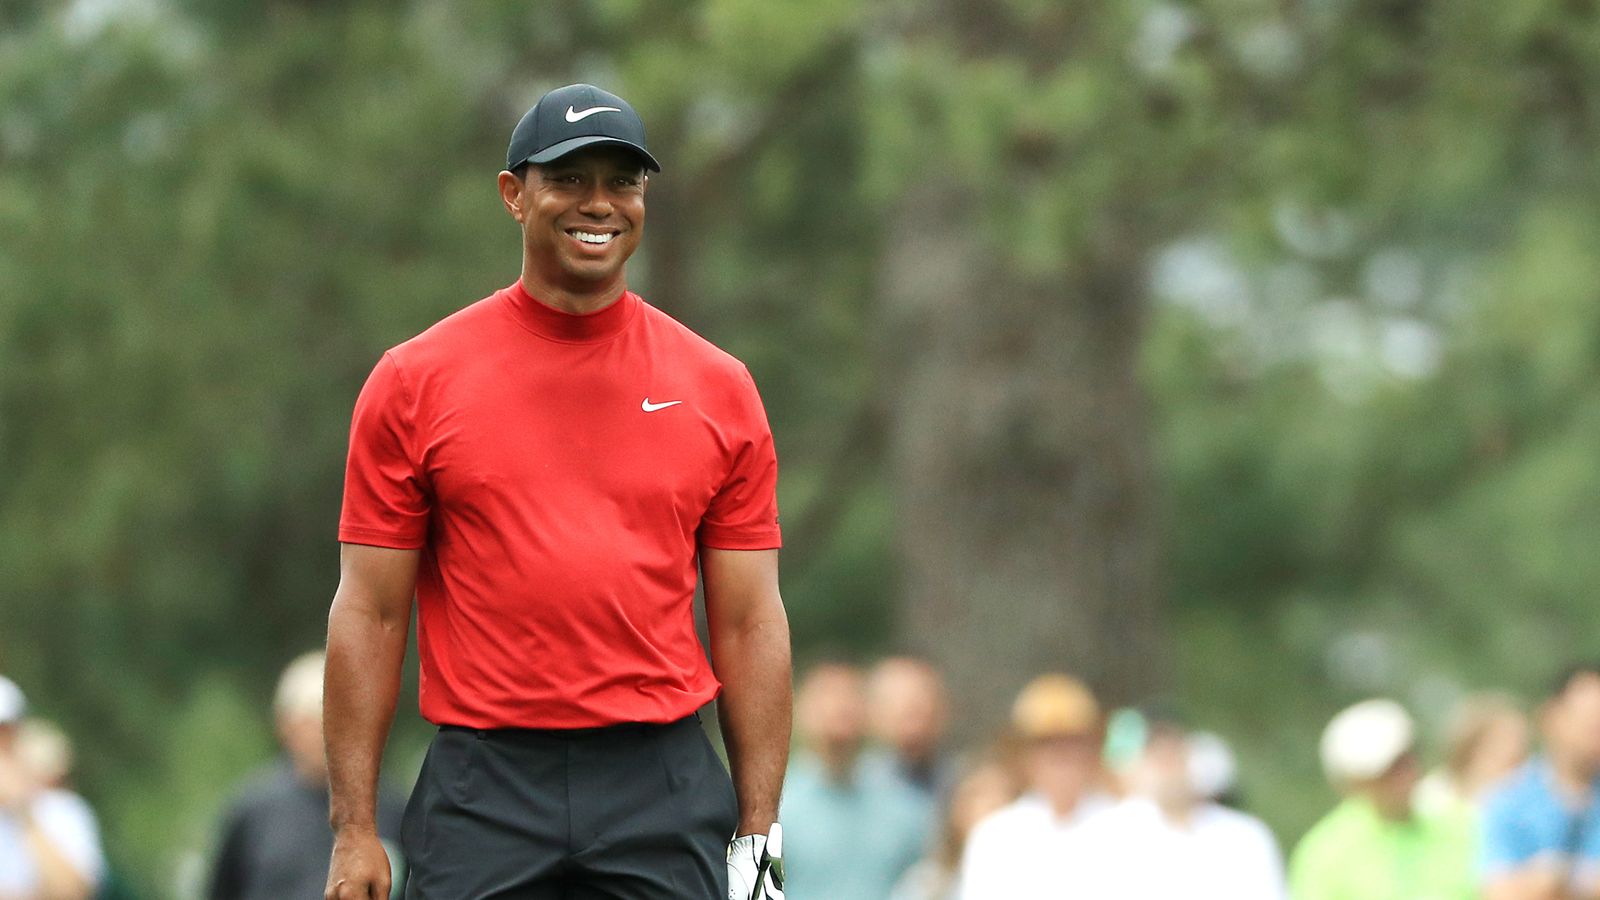 Tiger Woods to play in inaugural ZOZO Championship in Japan on PGA Tour | Golf News ...1600 x 900